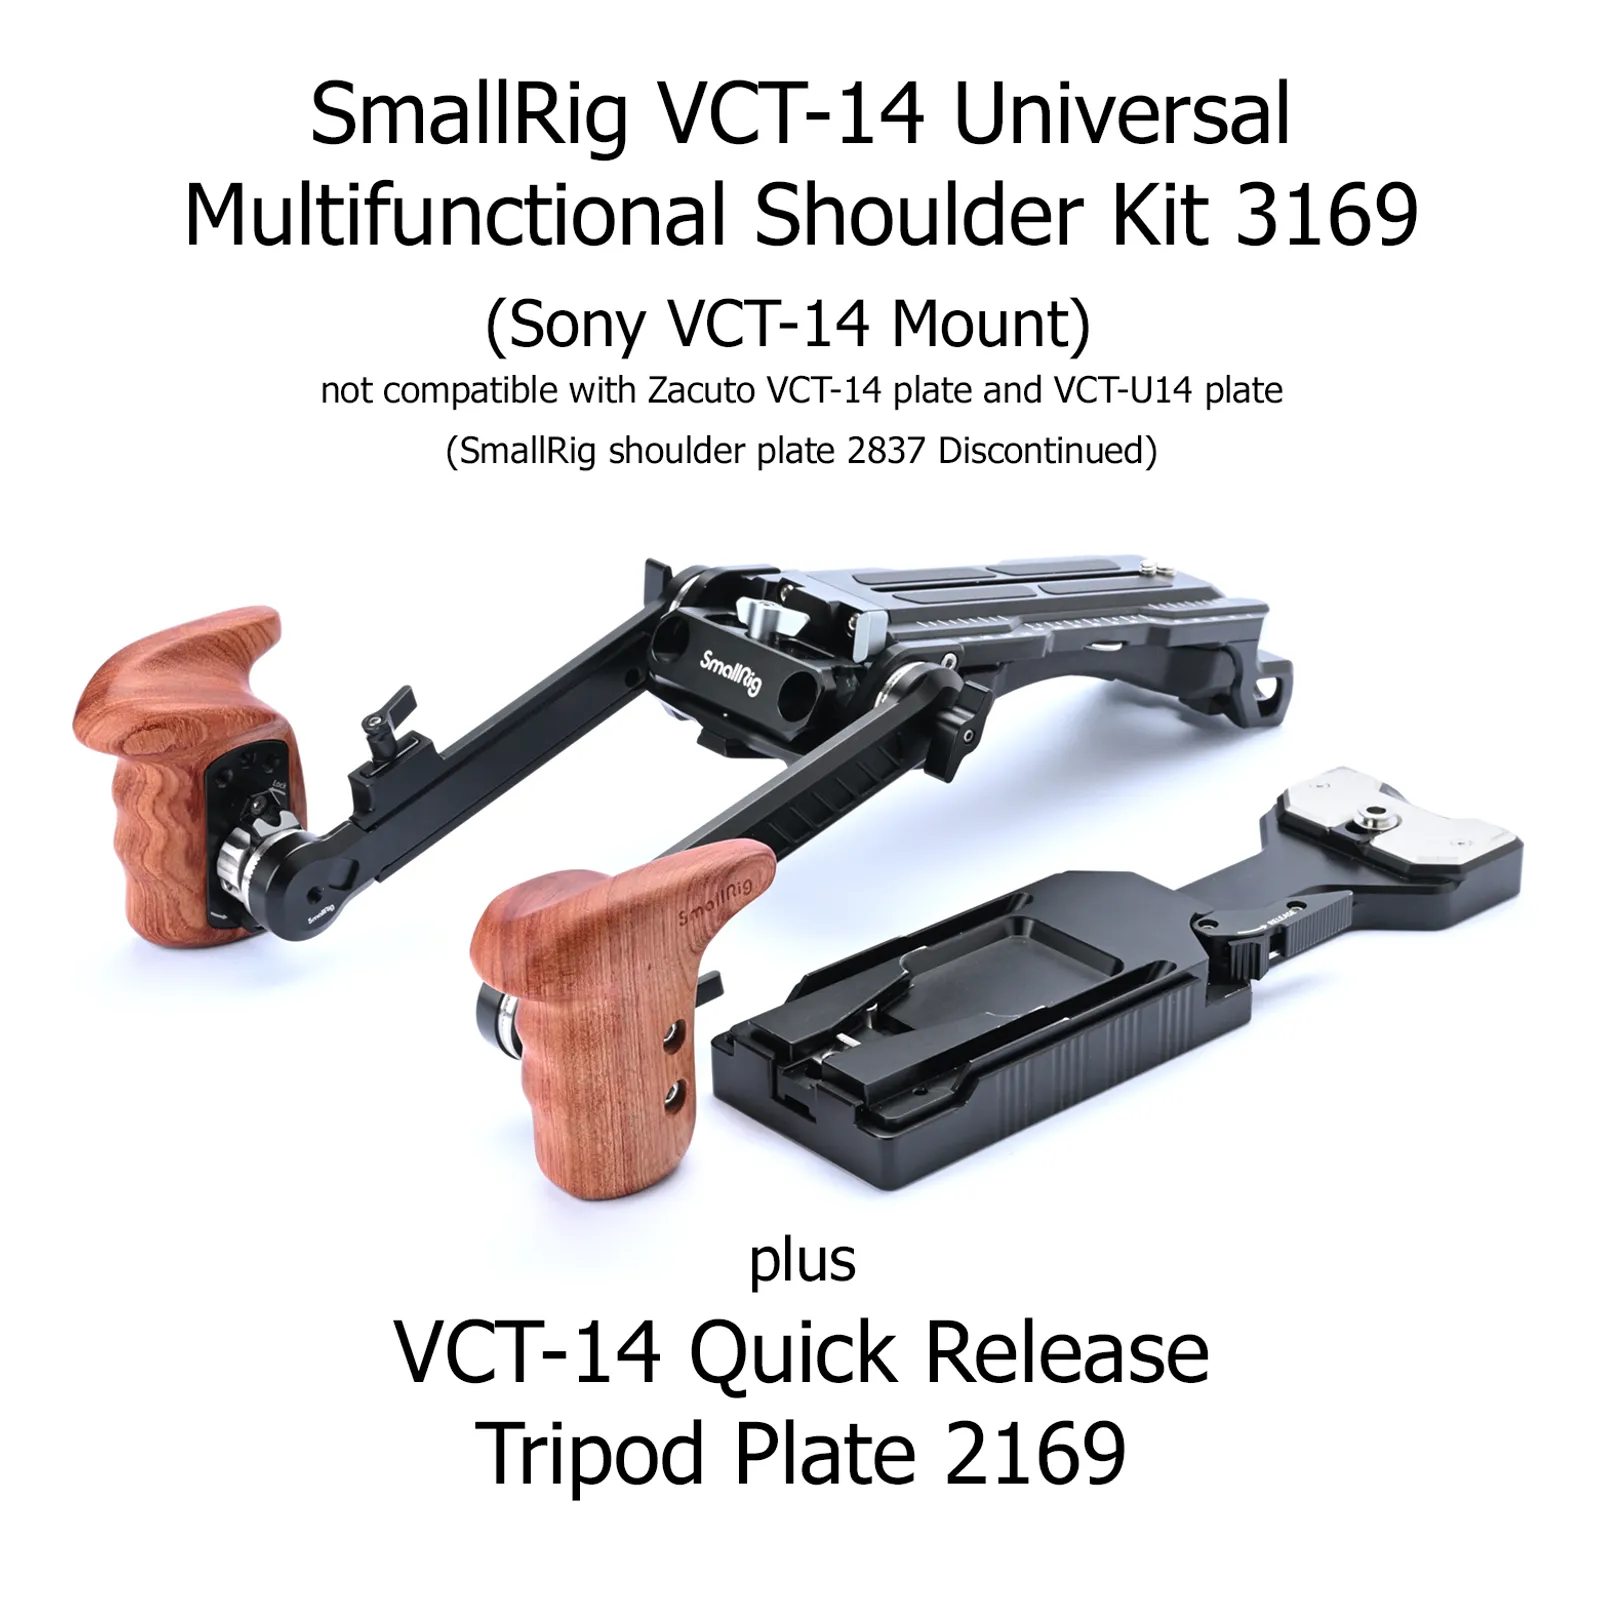 SmallRig Sony VCT-14 Universal Multifunctional Shoulder Kit 3169 + VCT-14 Quick Release Tripod Plate 2169